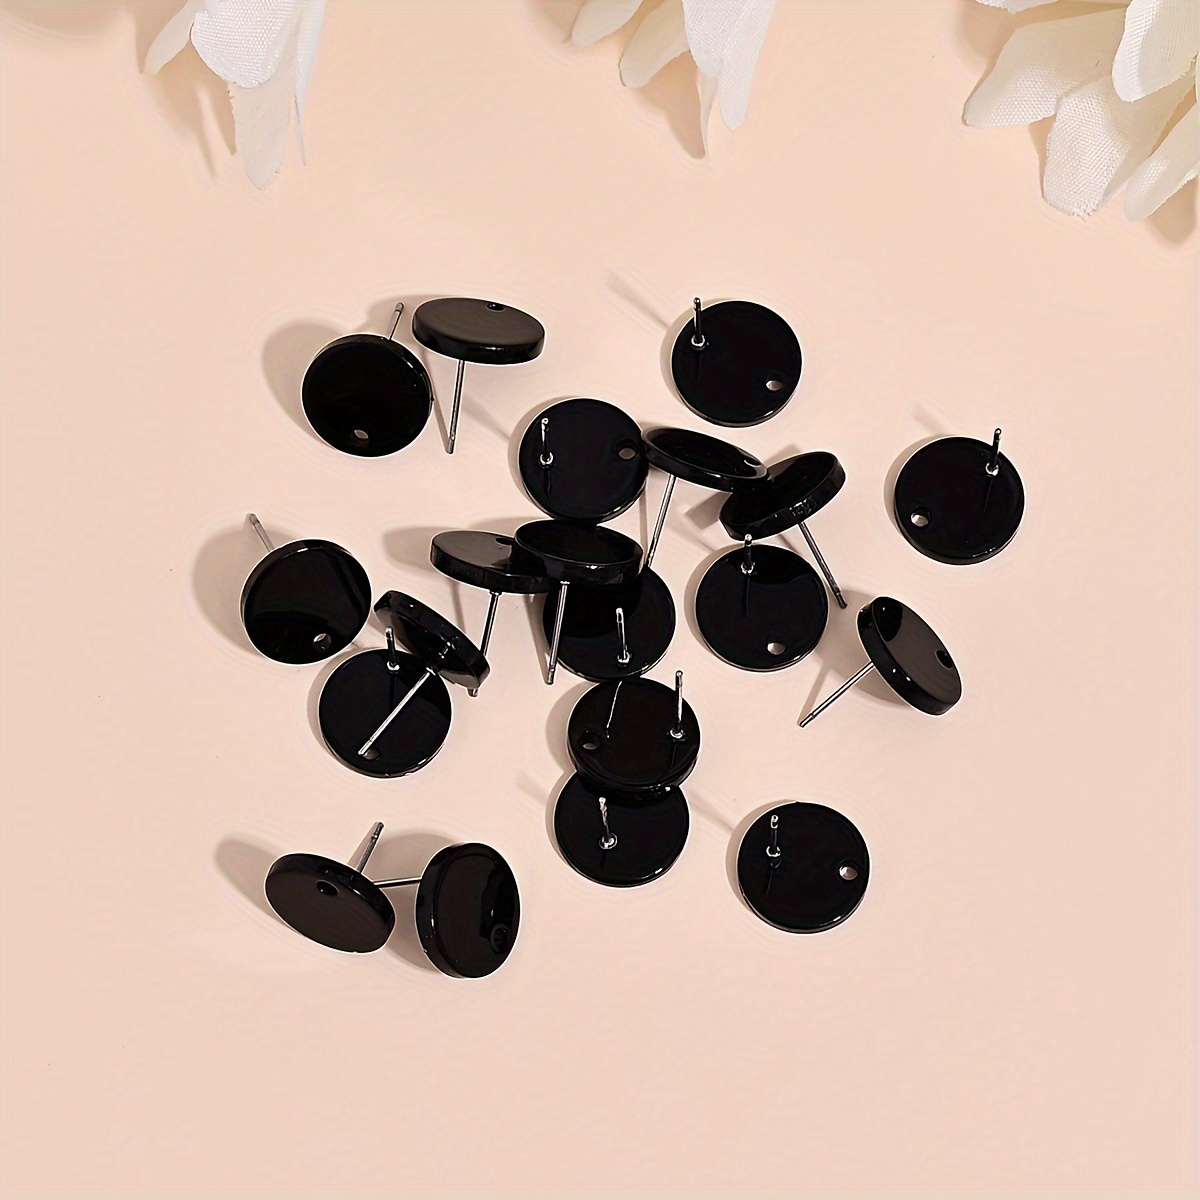 

20pcs Black And White Basic Earring Accessories Ear Studs Round Earrings For Diy Earrings Making Handmade Diy Jewelry